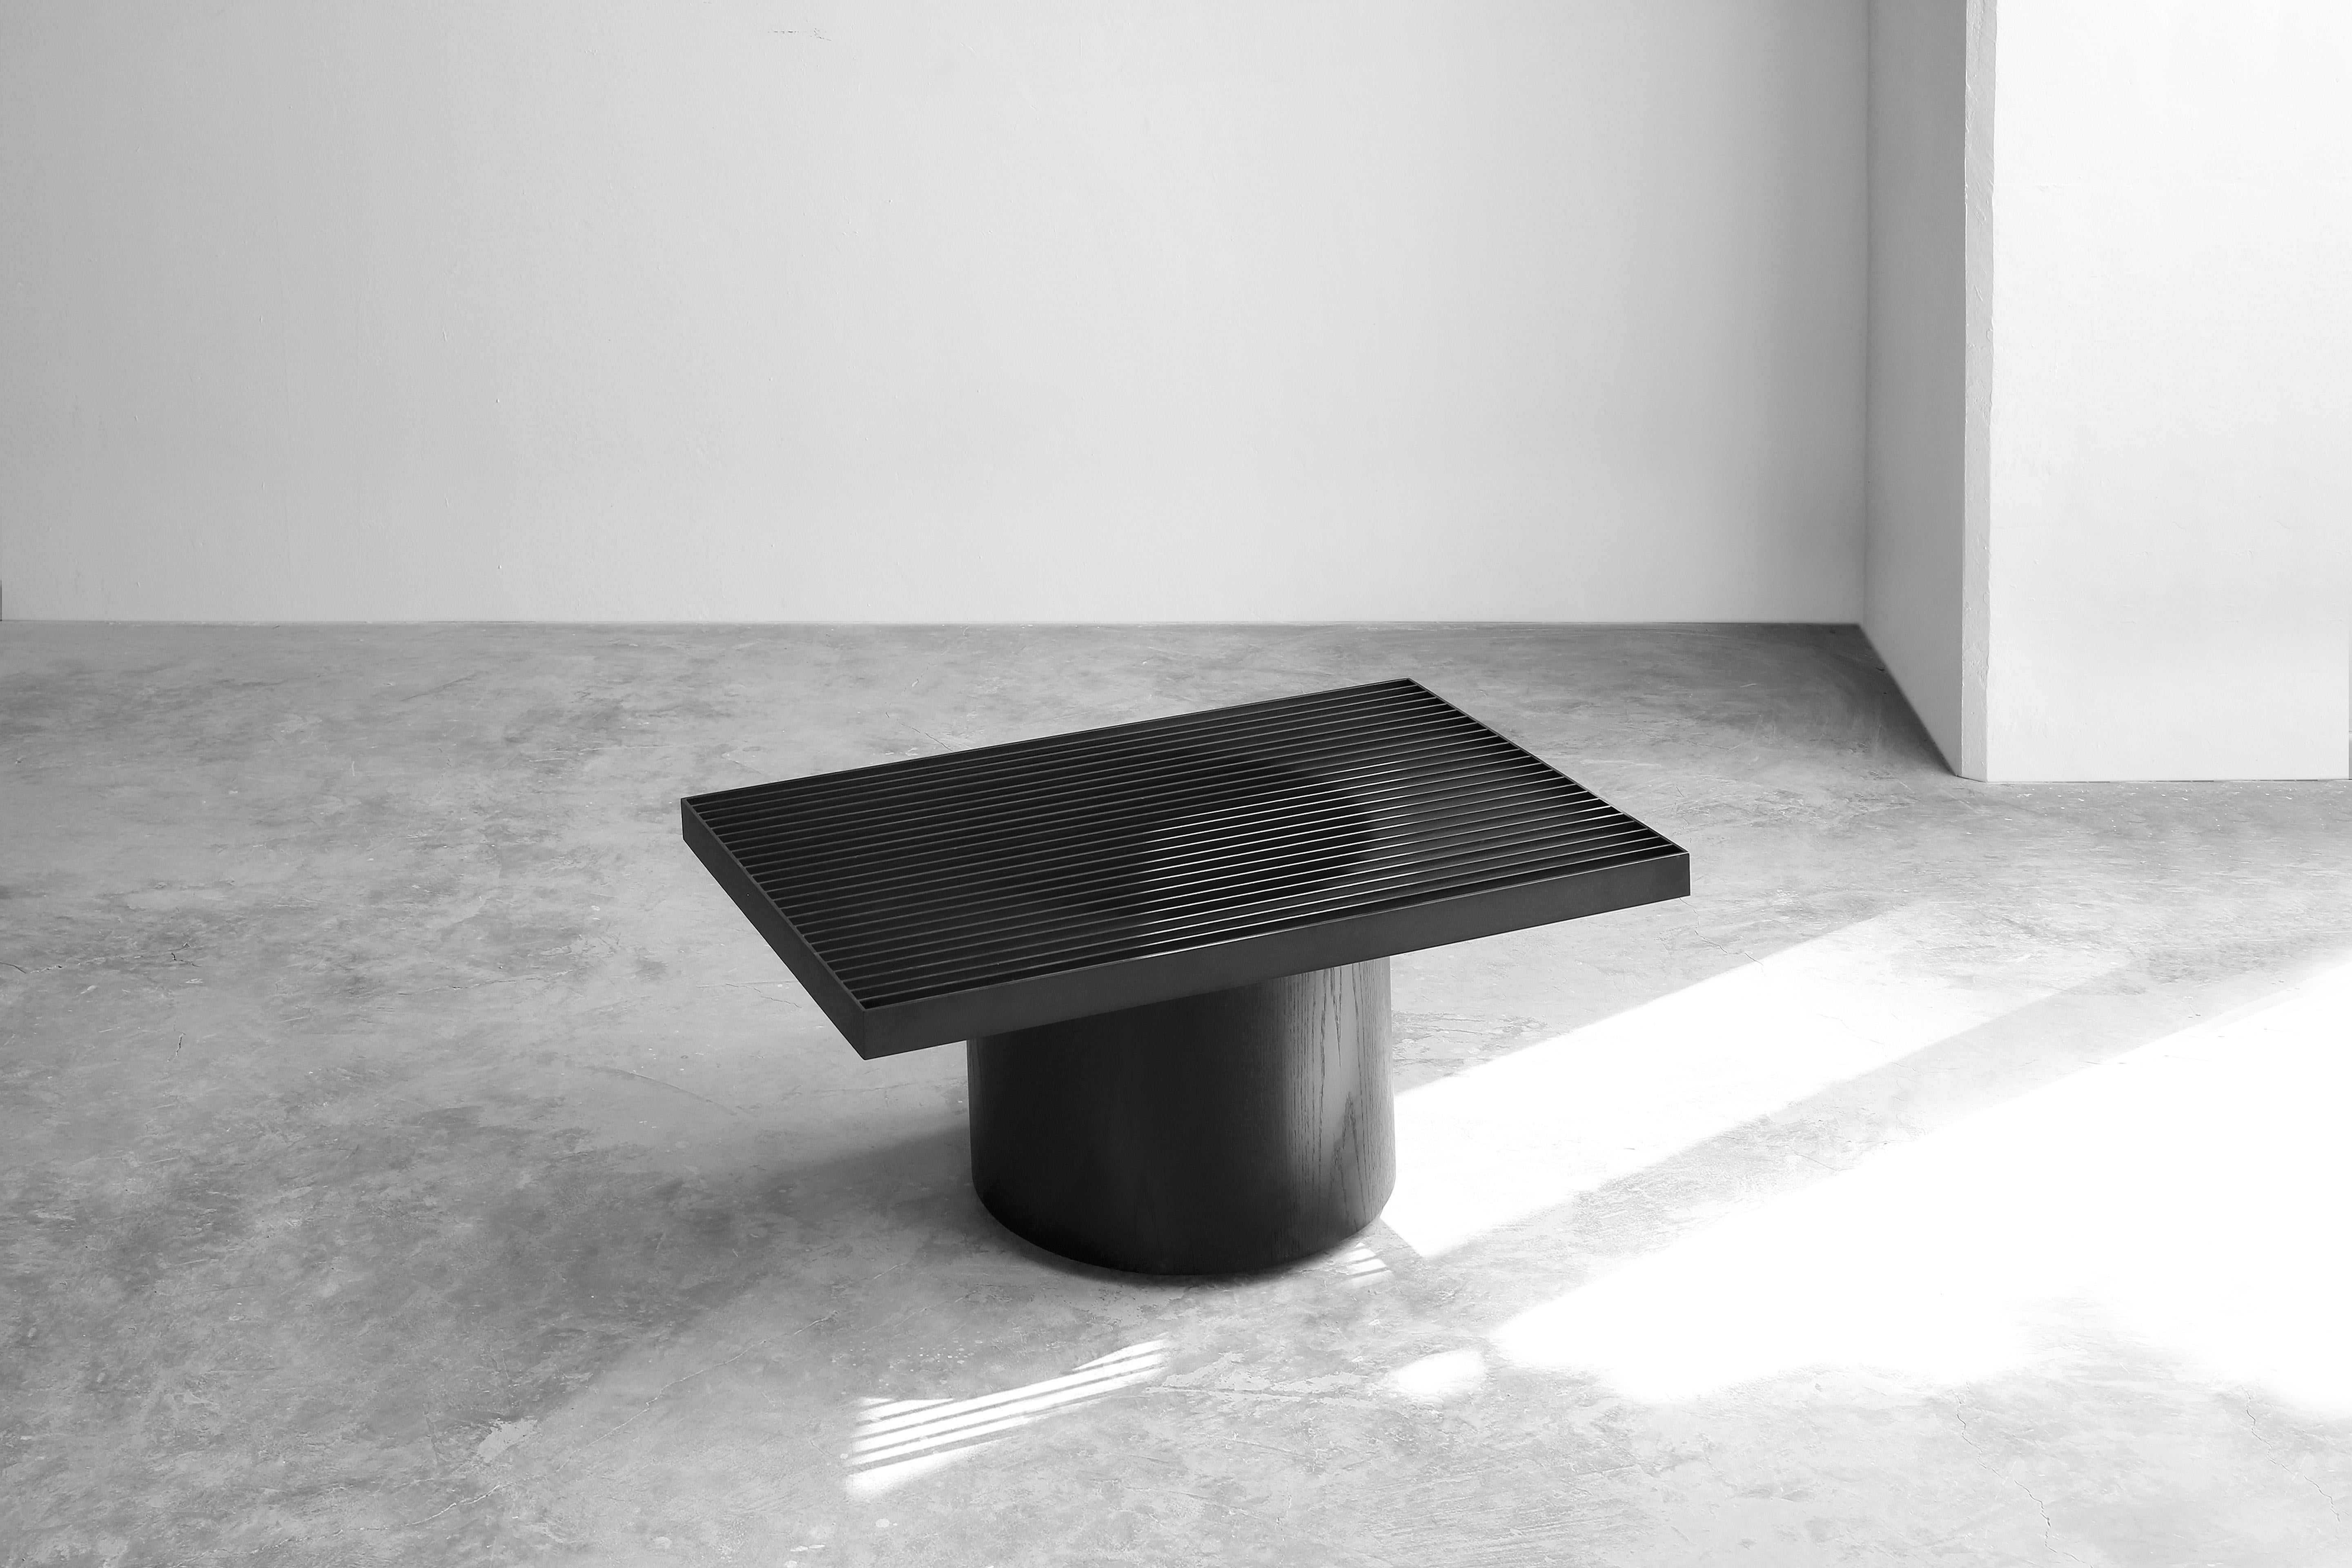 Movimiento coffee table by Joel Escalona
Limited Edition of 9
Dimensions: D 90 x W 58 x H 41 cm
Materials: oak wood, metal.
Natural white oak, burnt finish with metal table.
Joel Escalona
He was born in Mexico City and studied Industrial Design